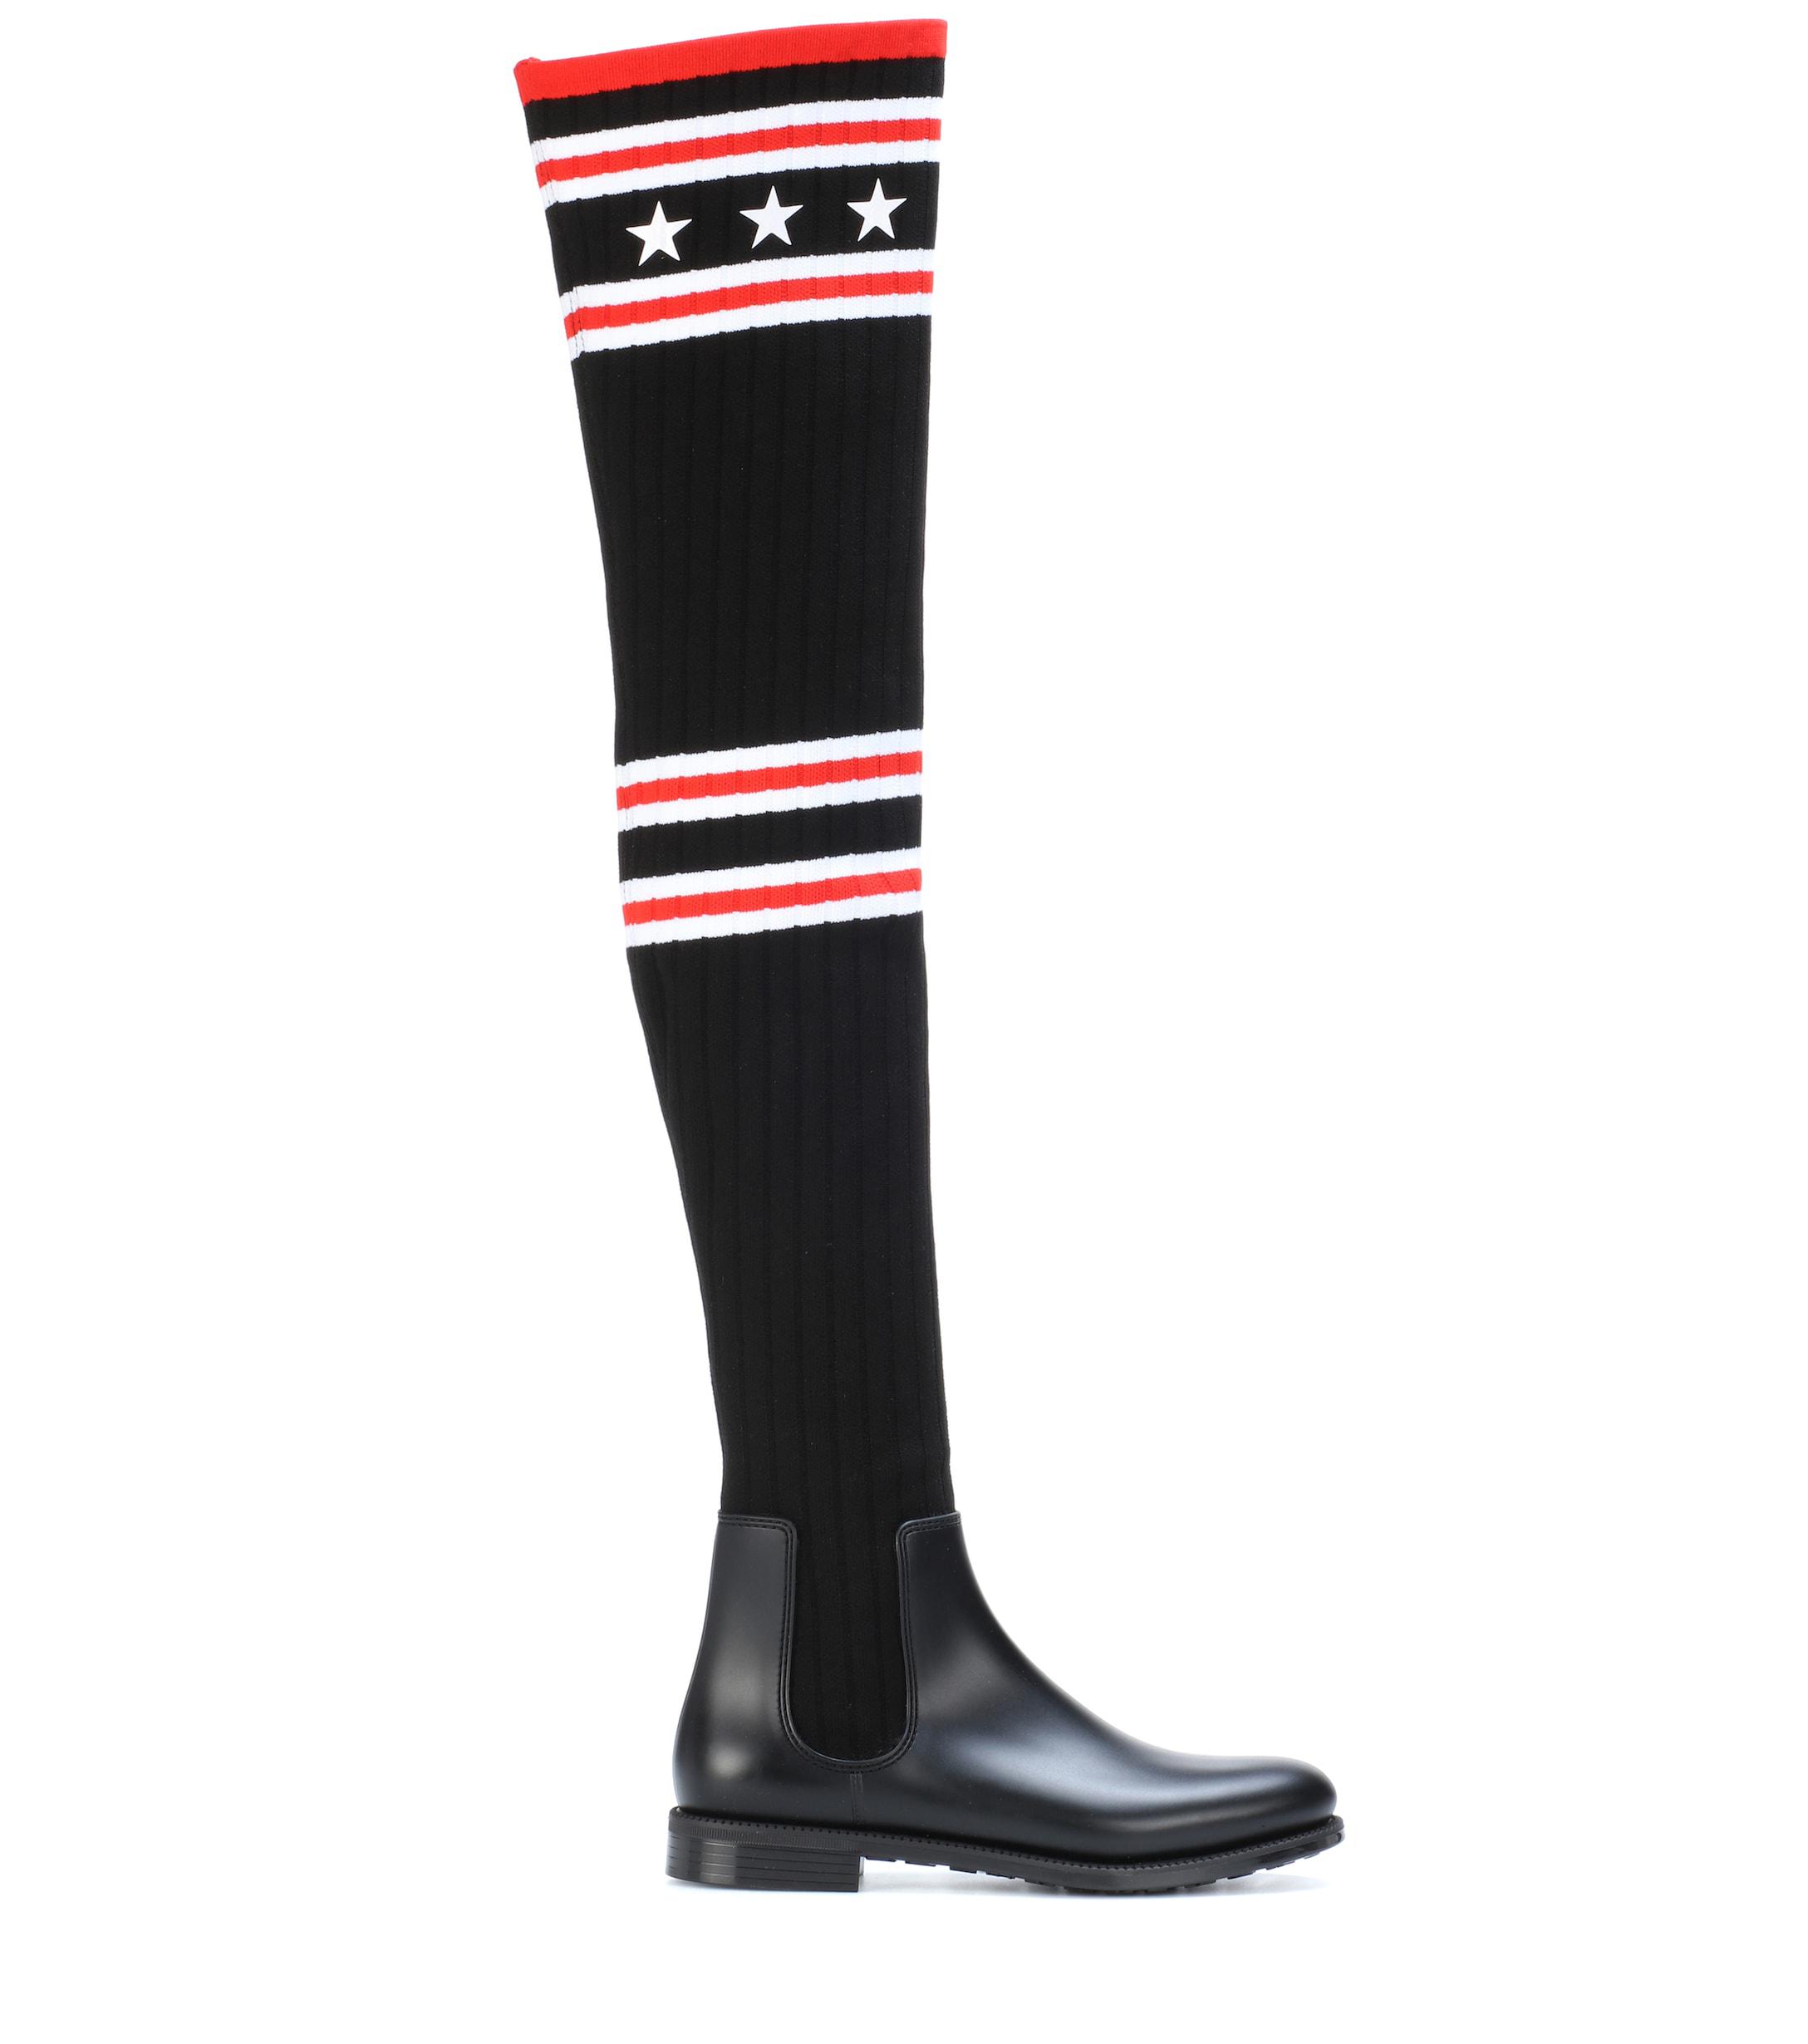 Givenchy Rubber Storm Over-the-knee Sock Rain Boots/booties in 